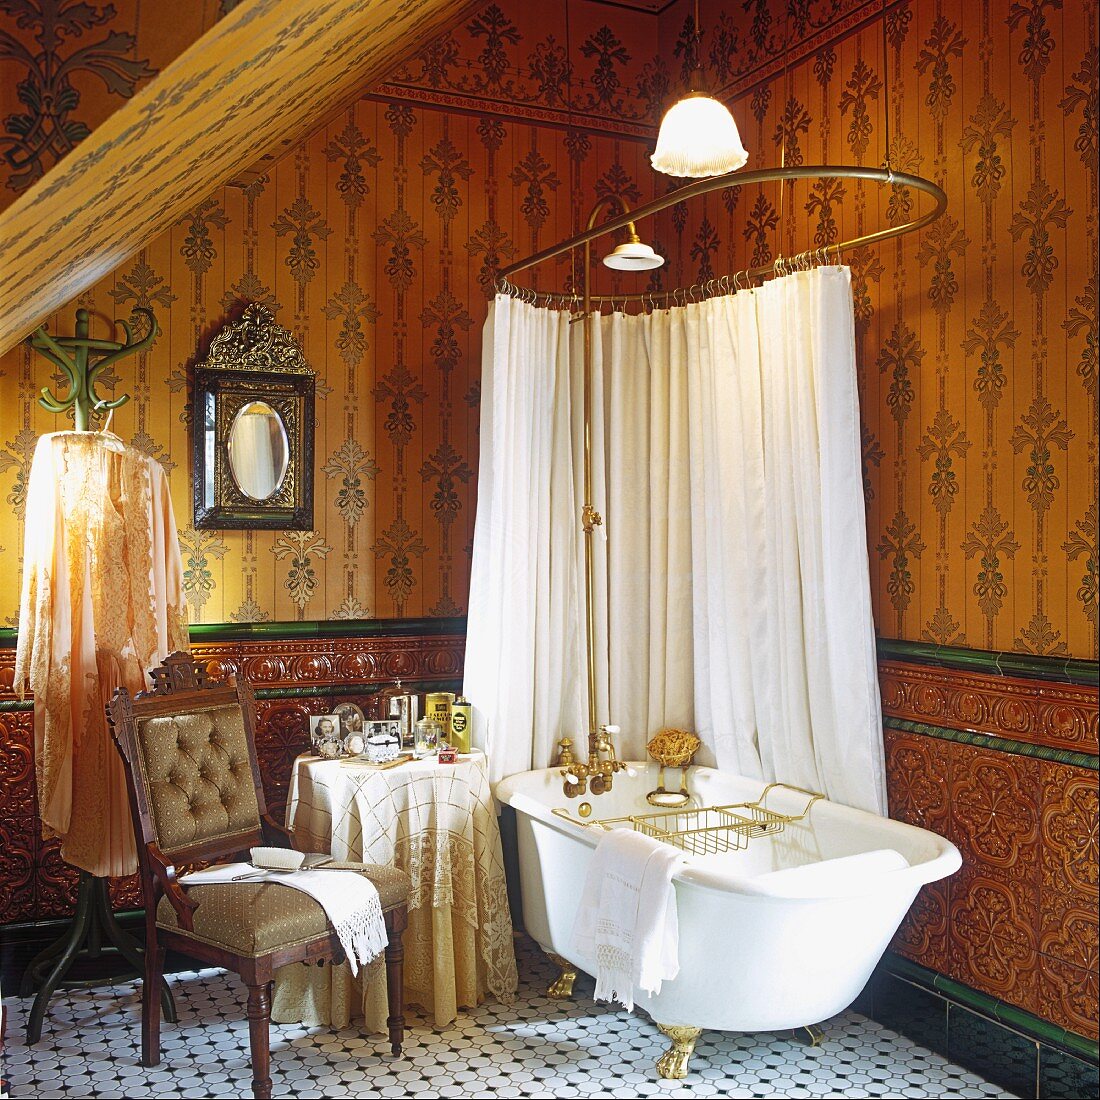 Free-standing bathtub with gilt feet and shower head and shower curtain hanging above in nostalgic bathroom